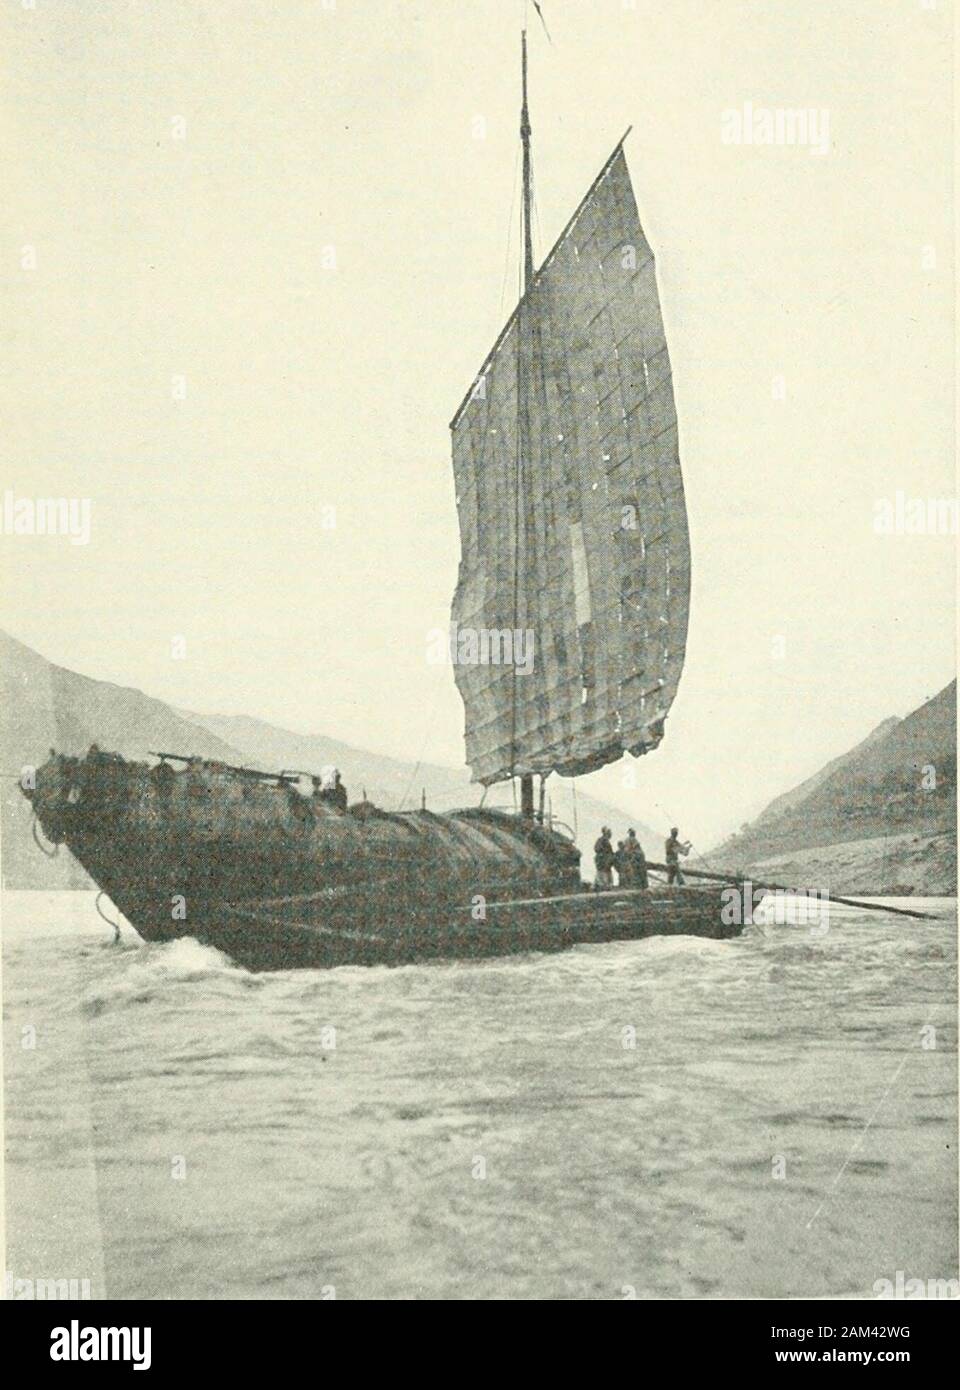 Travels in north and central China . LARGE JUNK WITH MAST DOWN. As we passed we saw a large junk careened forrepairs to her bottom, and a little further on, dryingon the beach, the cargo of another which had beenwrecked. Owing to our official escort we wereprivileged to go right to the head, had we chosento do so, but we took our place behind three otherboats which were waiting. We moored at thenarrowest point, where the stream was ascertainedby Matheson to be 175 yards wide, with a currentrunning at about 10 knots as far as one could tell,so that the channel would be difficult for a steamer.. Stock Photo